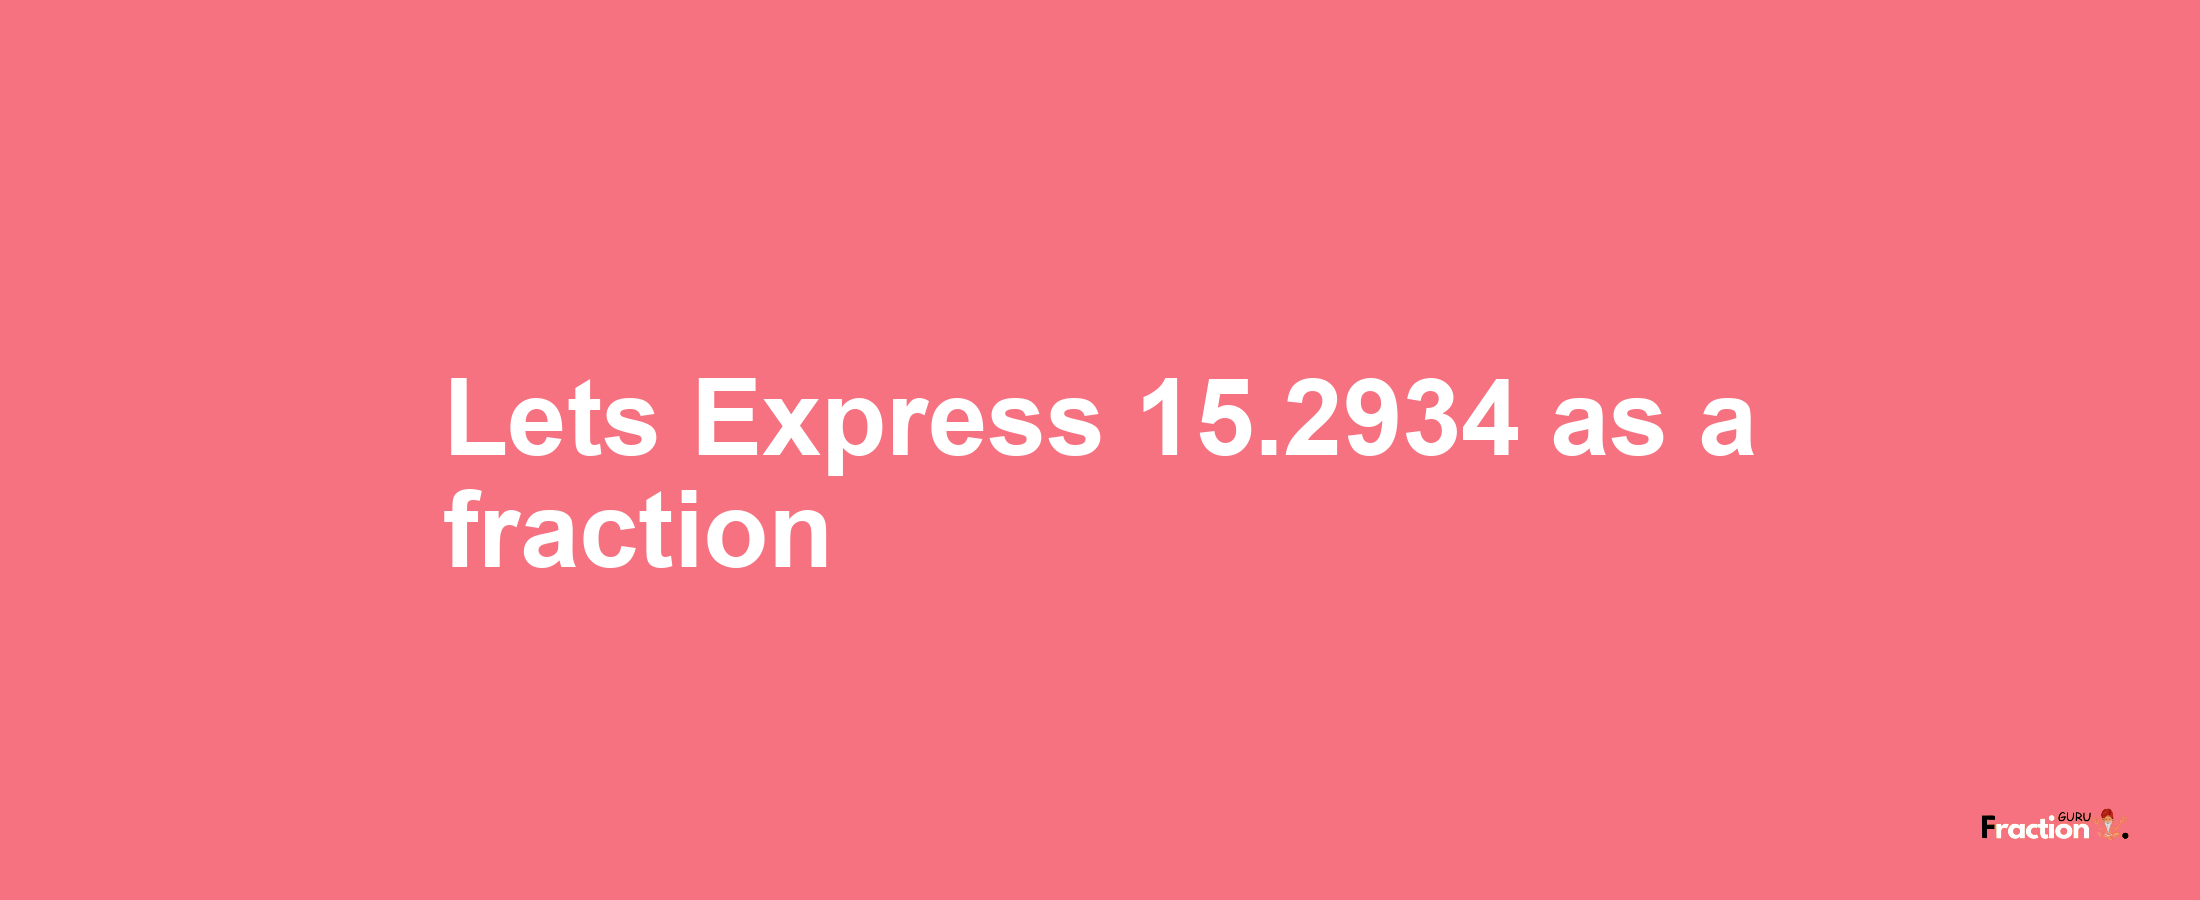 Lets Express 15.2934 as afraction